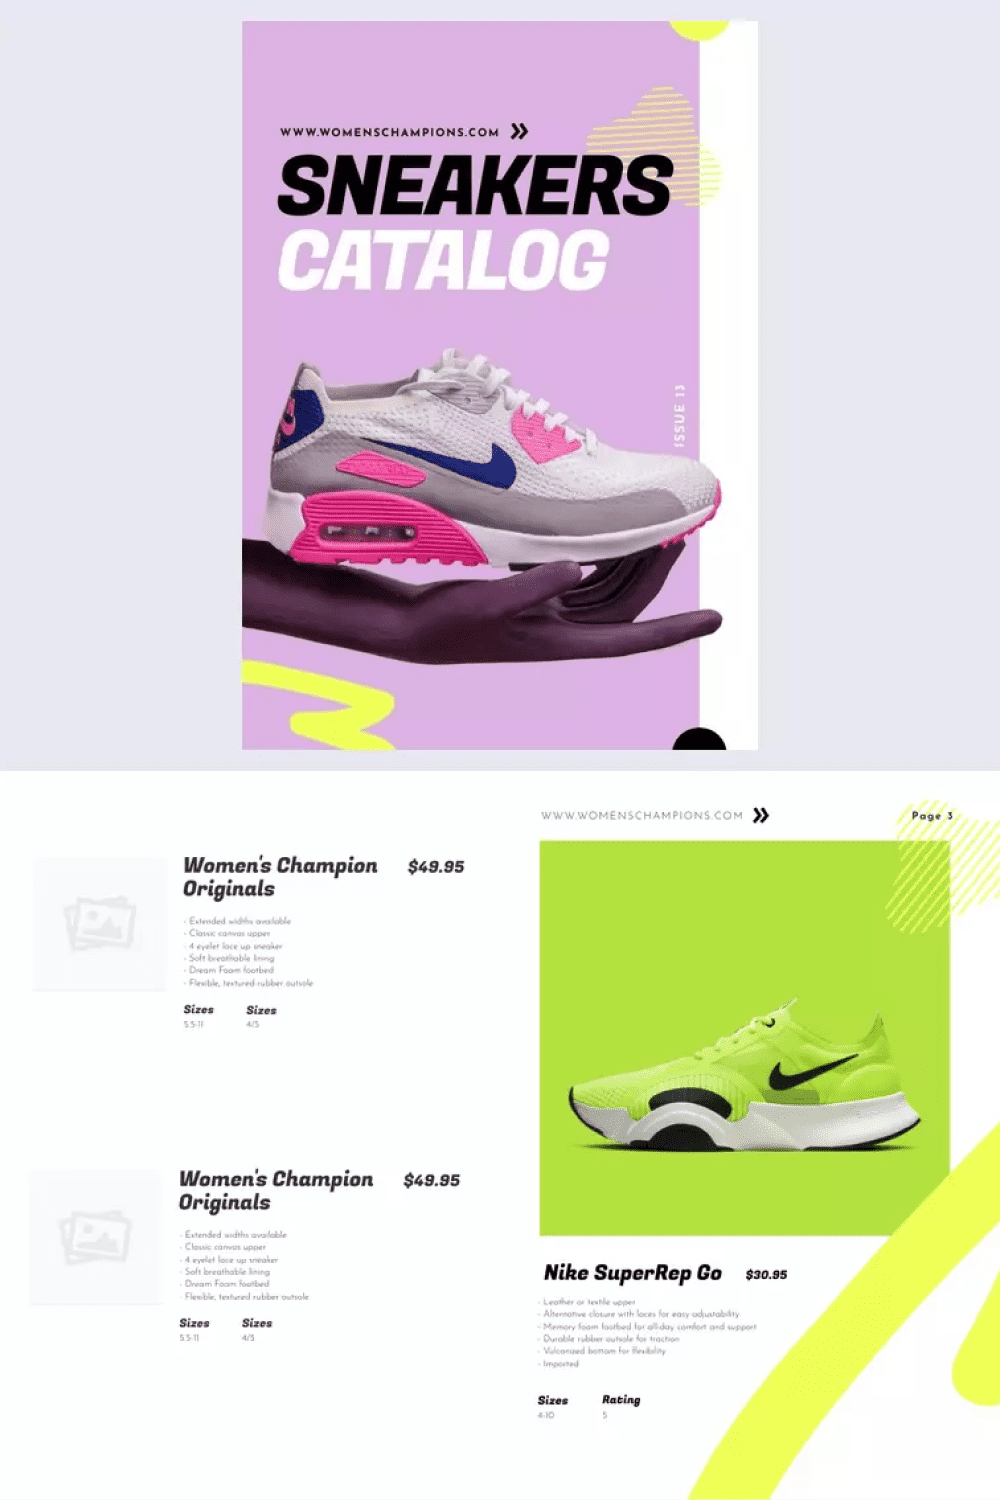 Colorful and modern template.